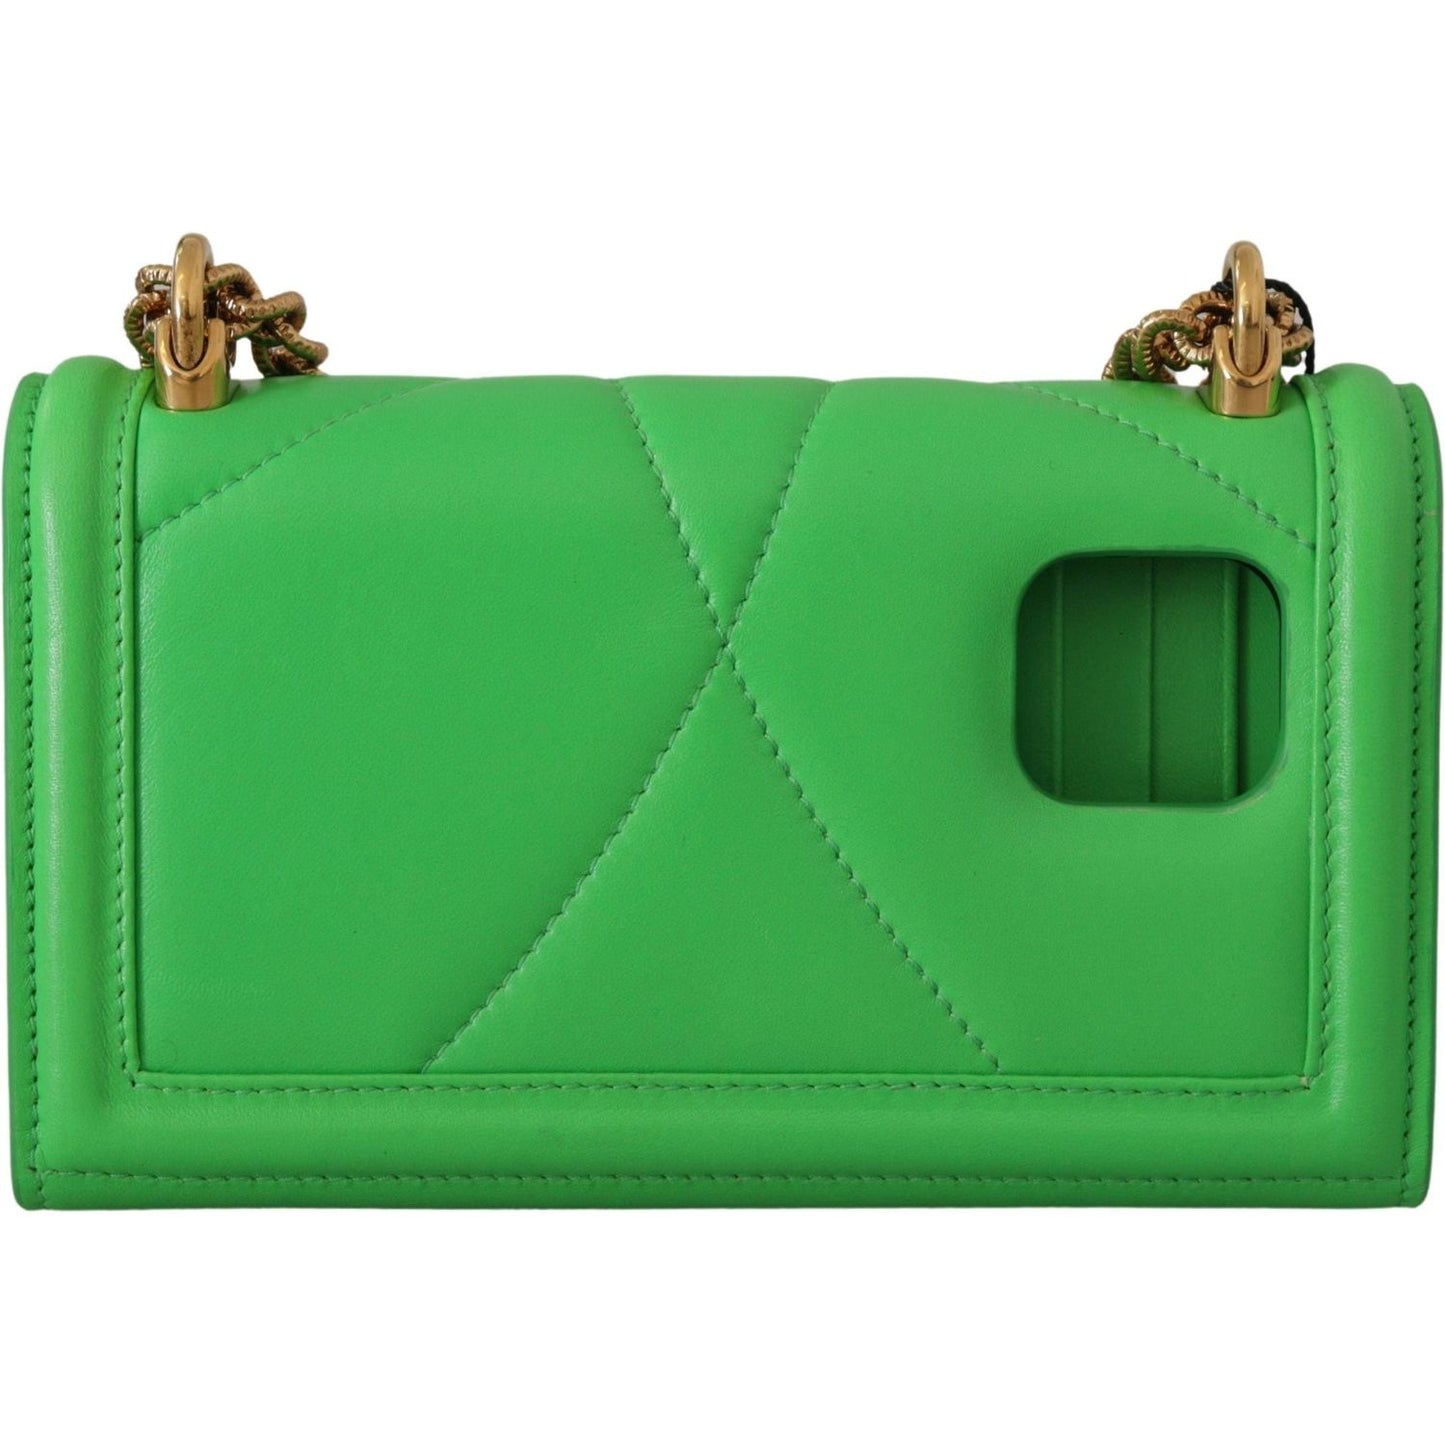 Dolce & Gabbana Elegant Leather iPhone Wallet Case with Chain green-leather-devotion-cardholder-iphone-11-pro-wallet